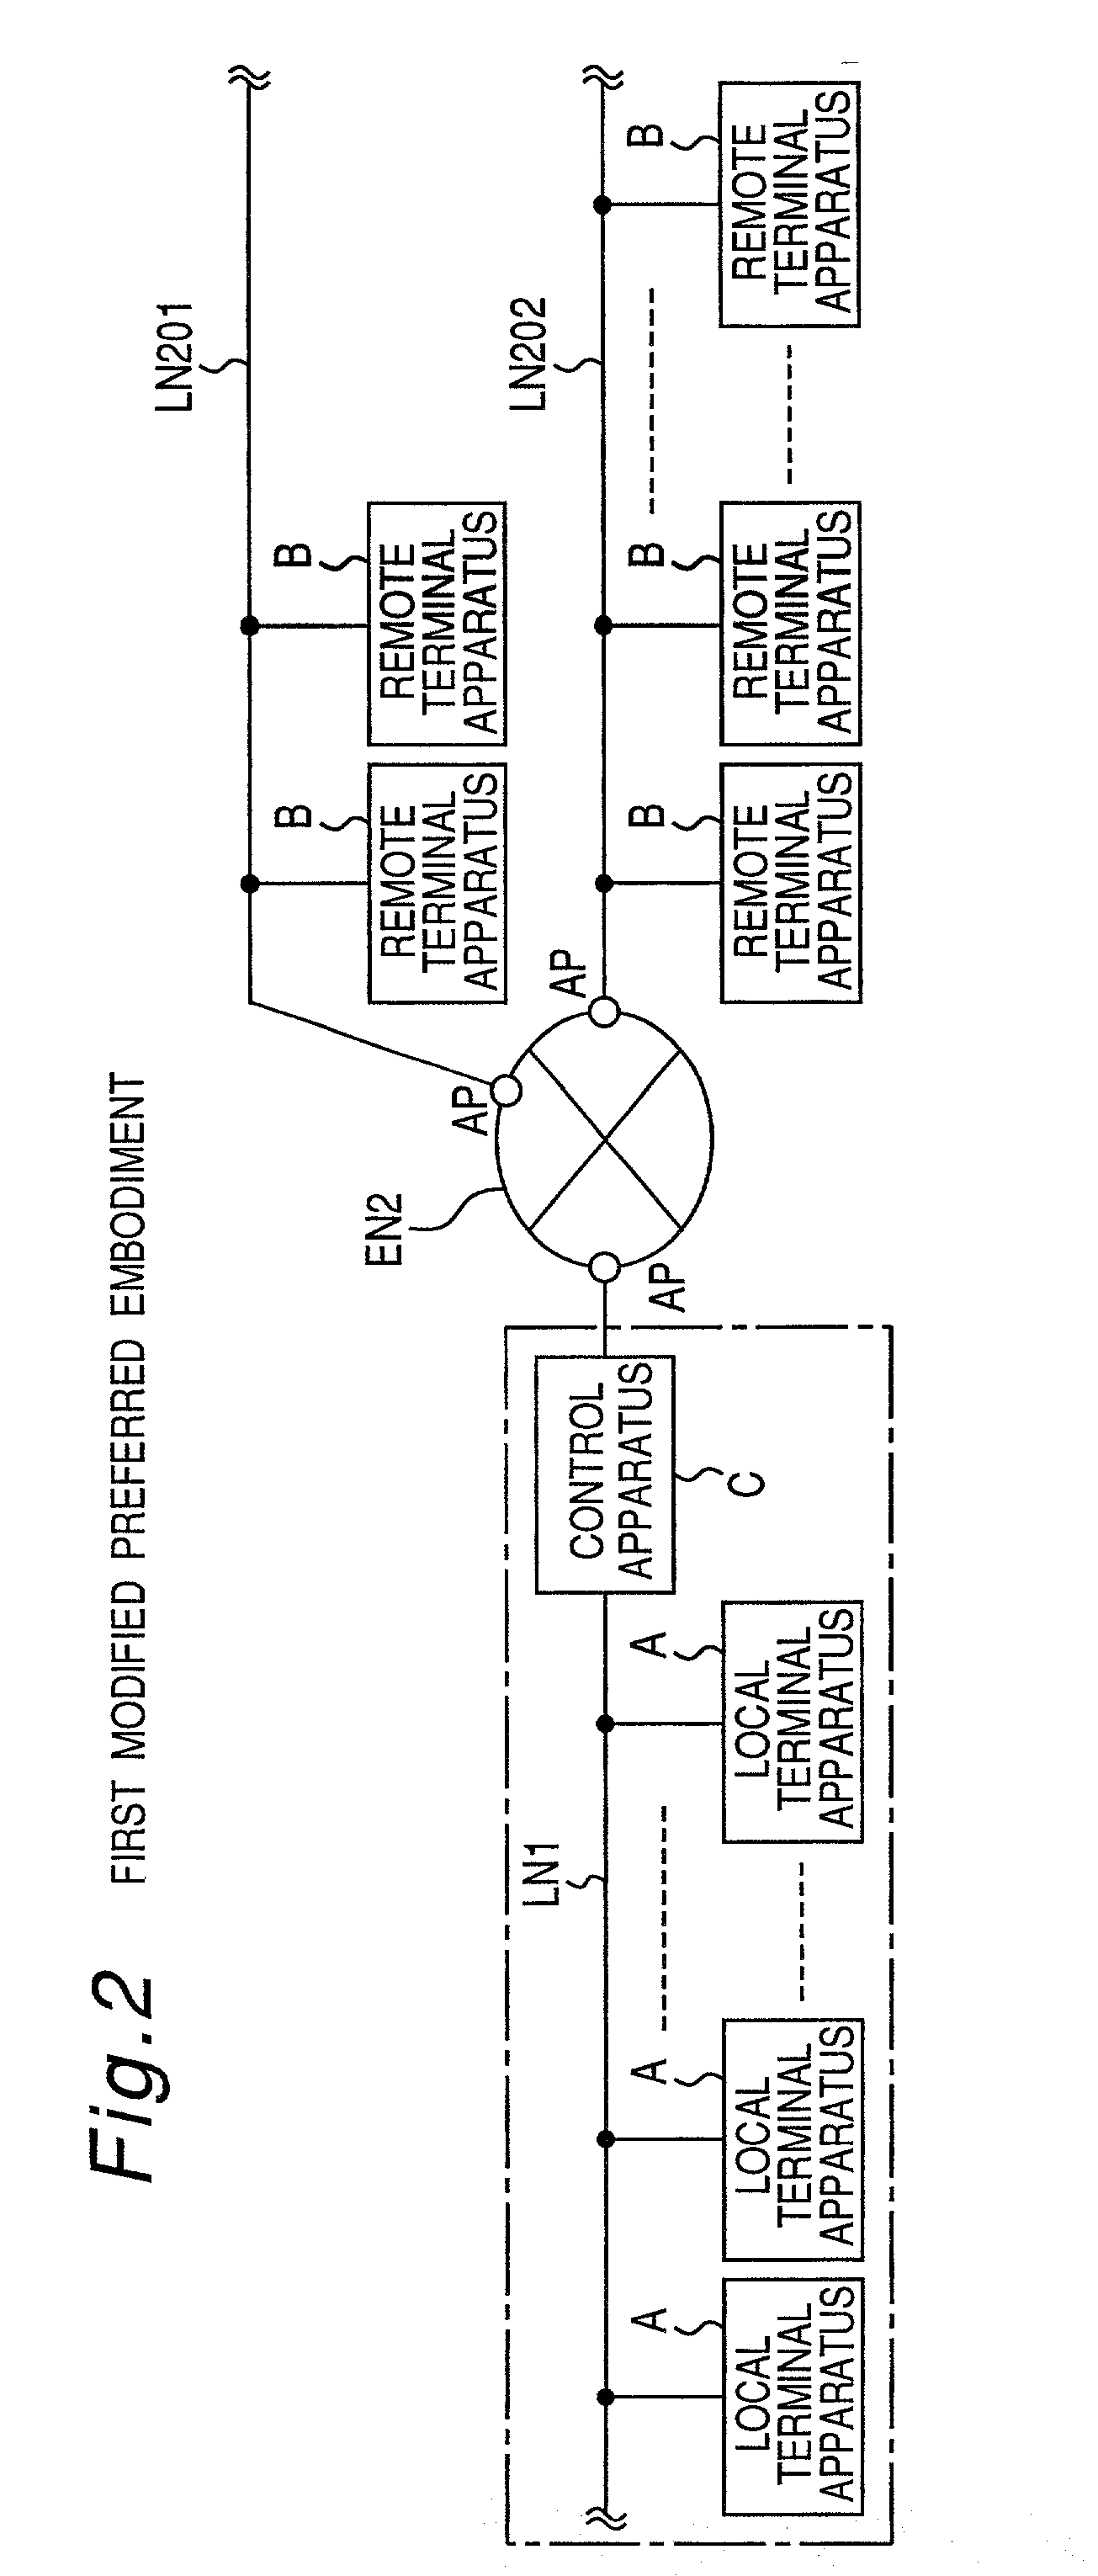 Communication system provided with control apparatus between local network and external network